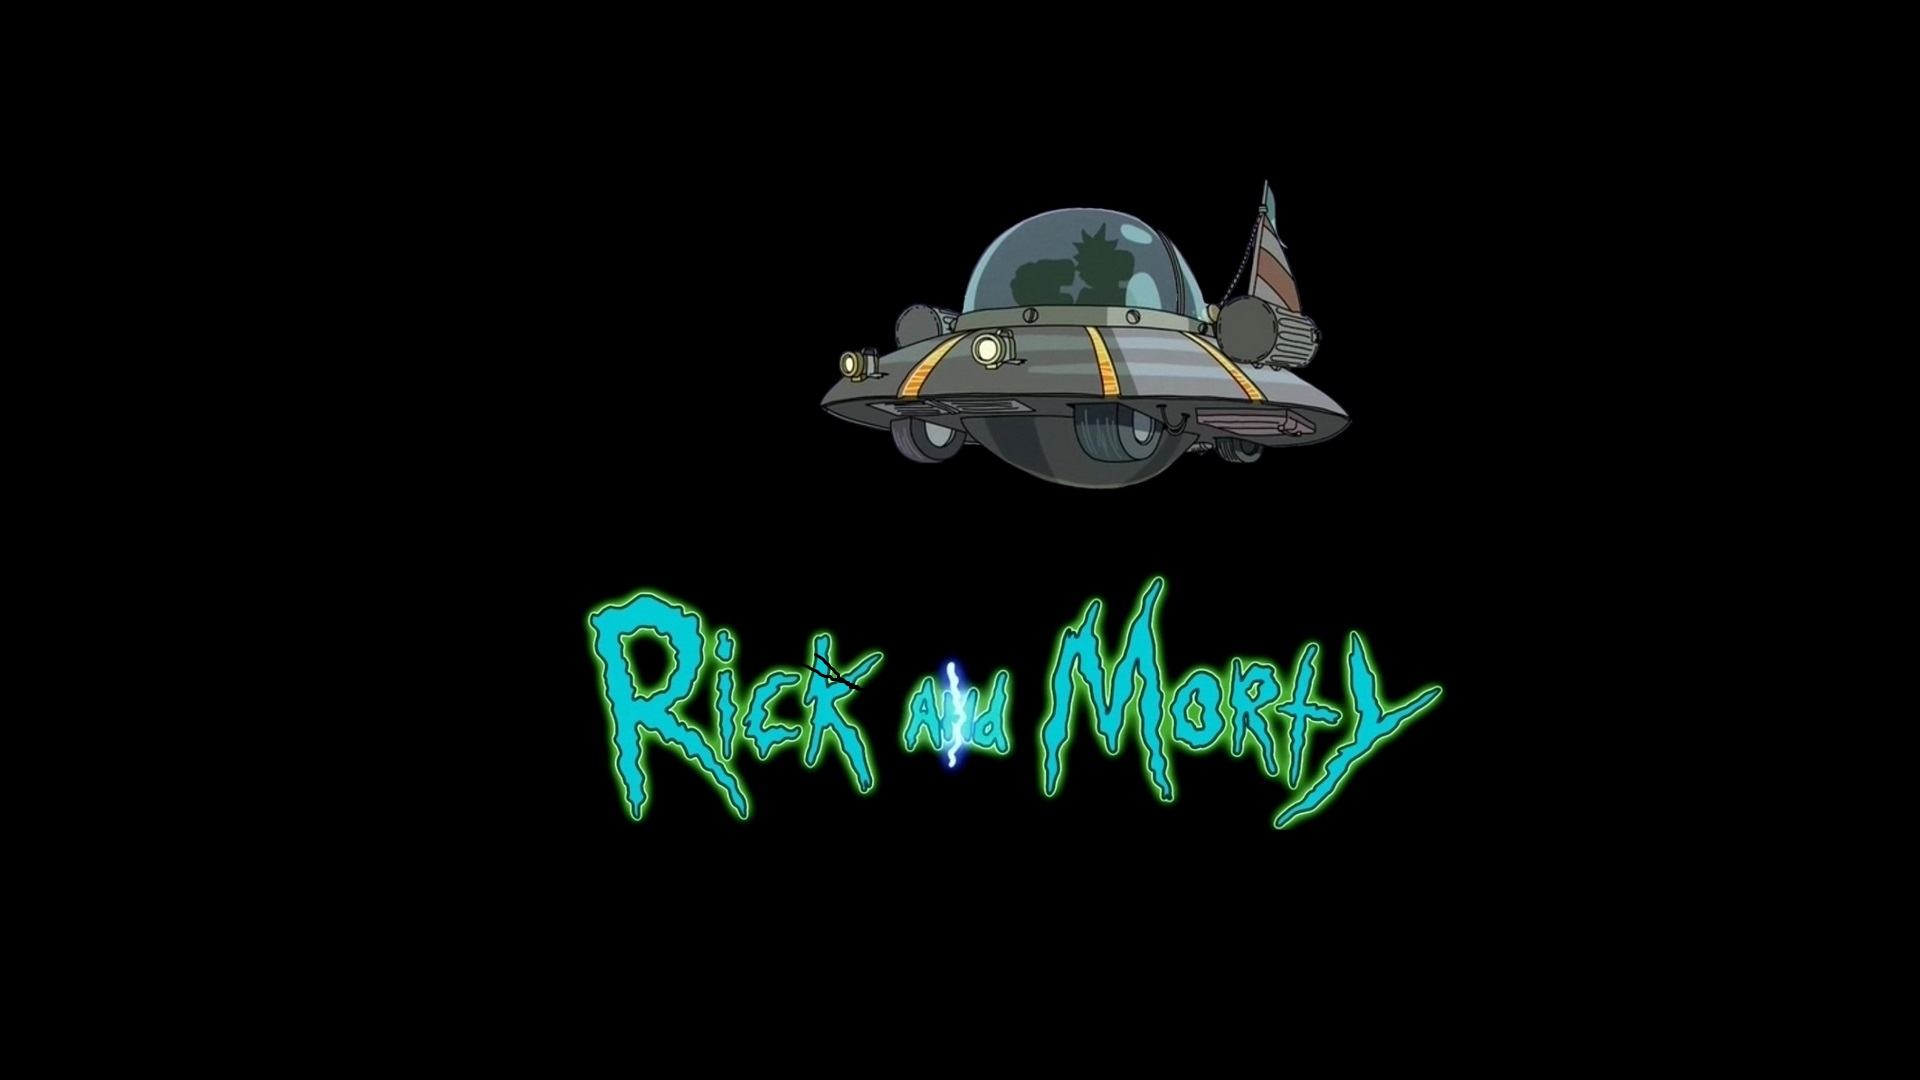 Morty Smith Rick Sanchez Rick And Morty Space Cruiser Rick And Morty 1920x1080